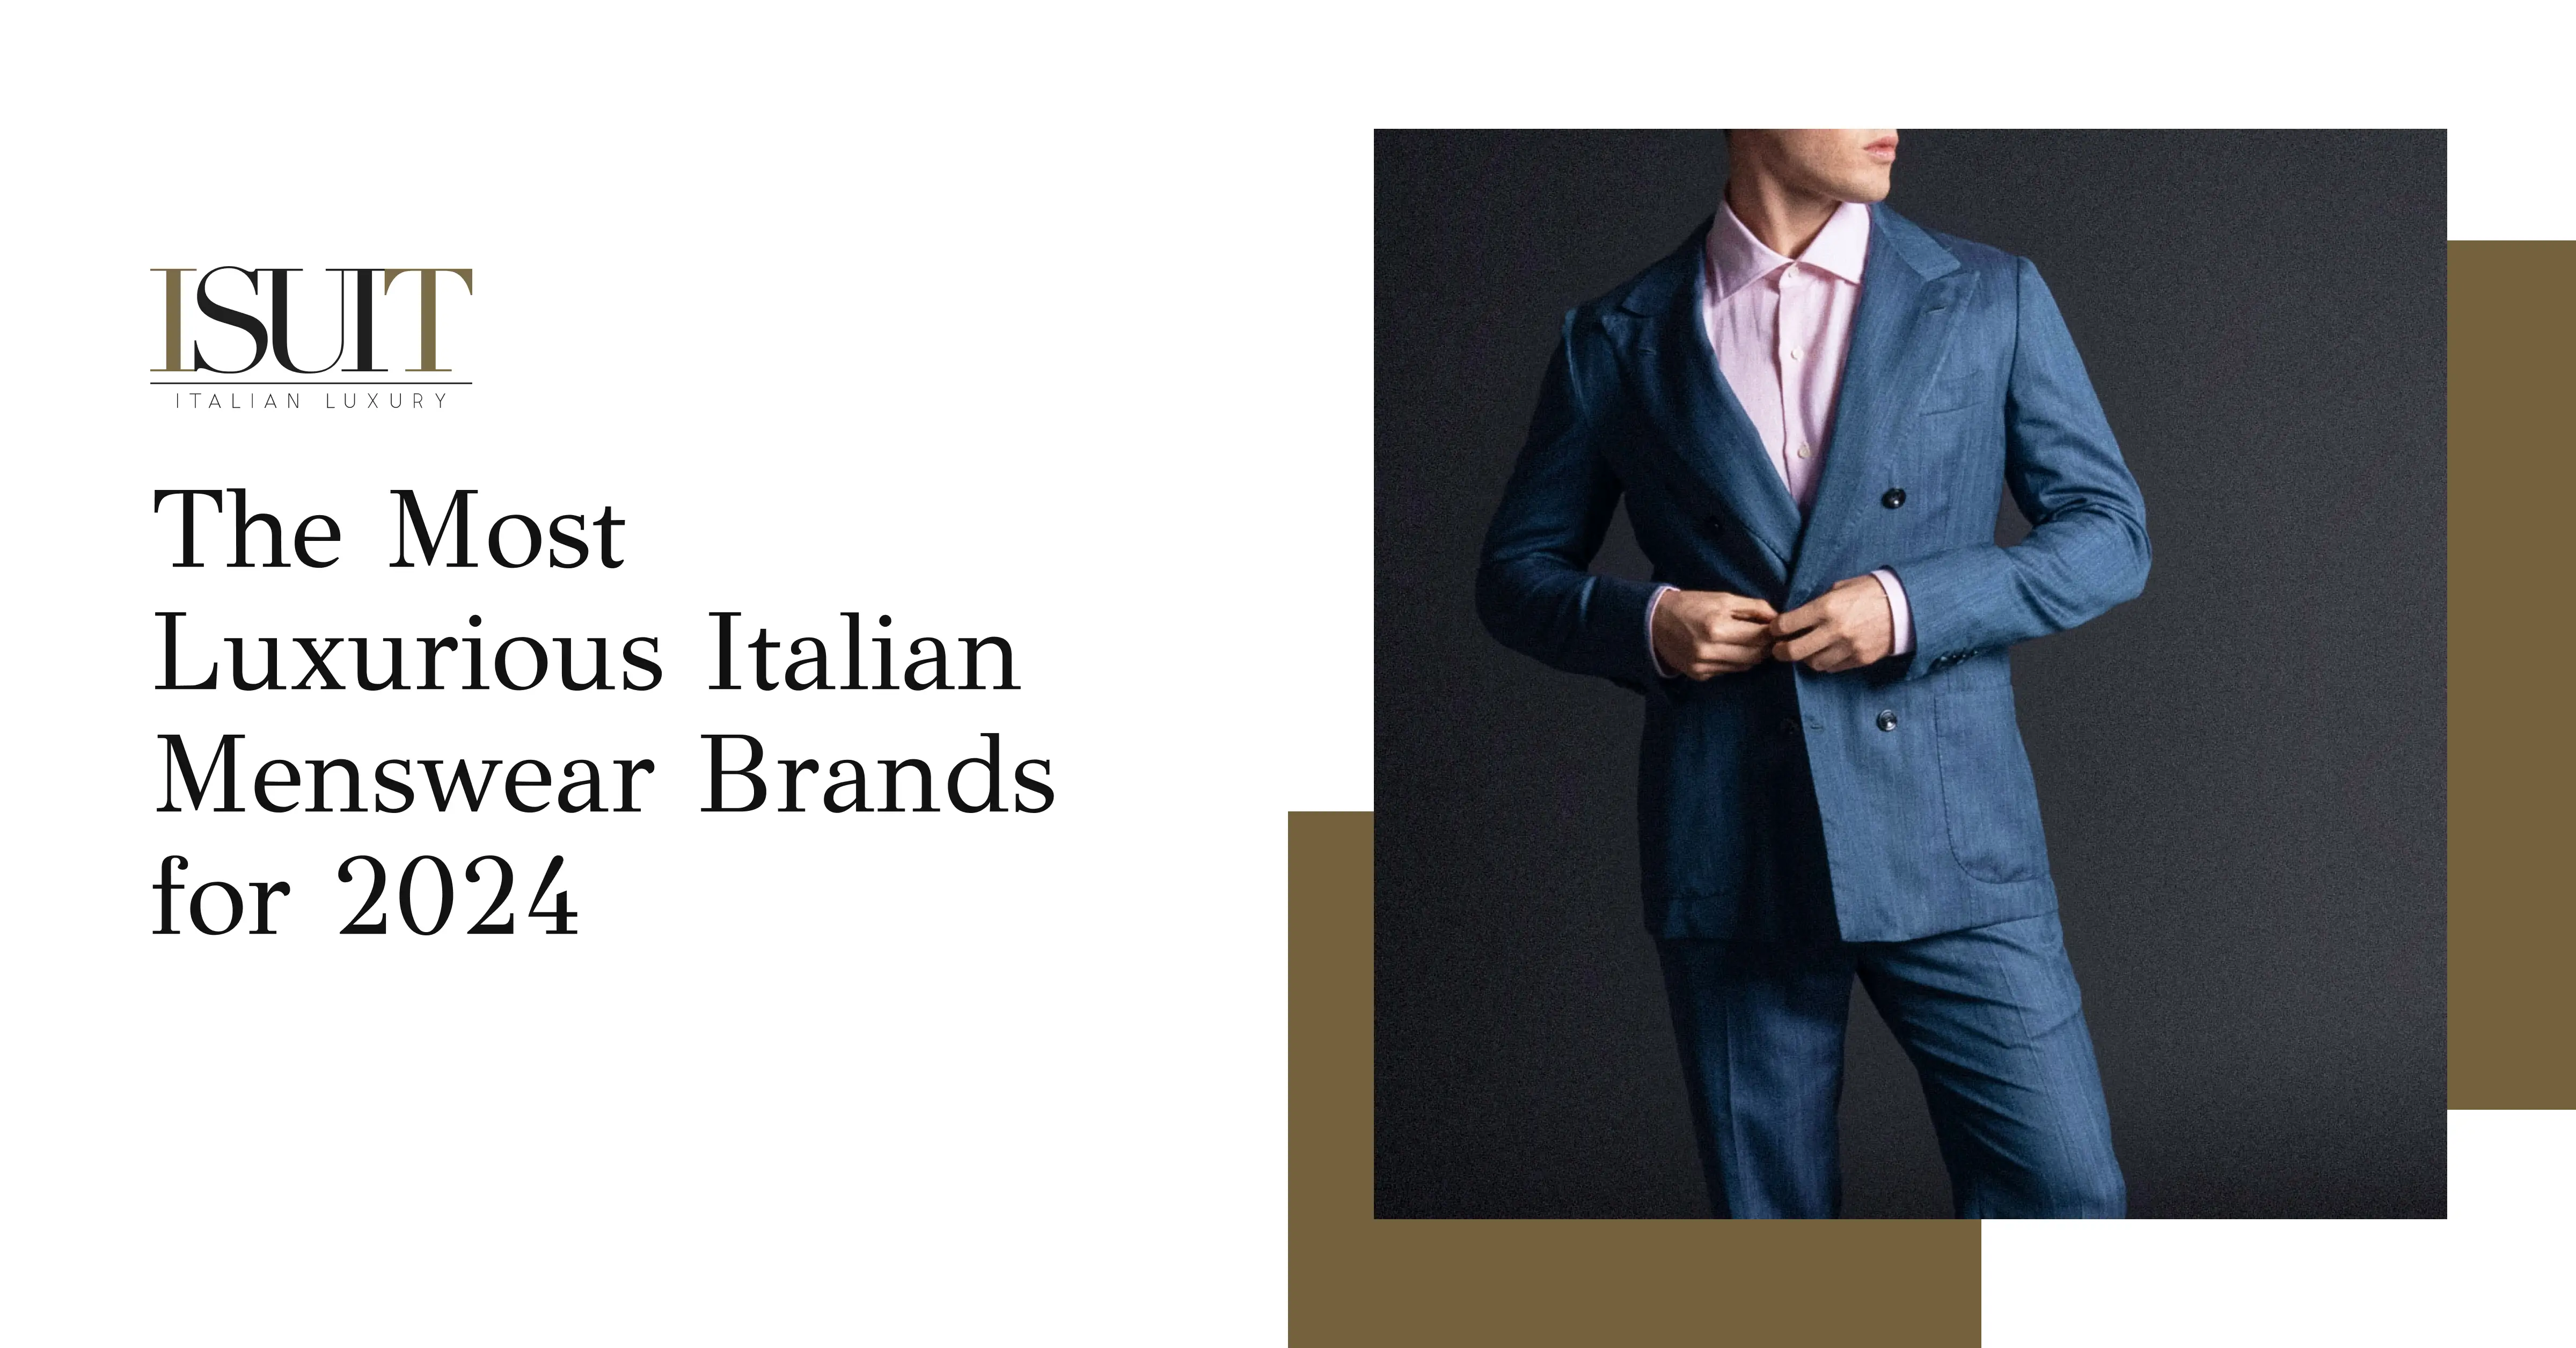 The Most Luxurious Italian Menswear Brands for 2024